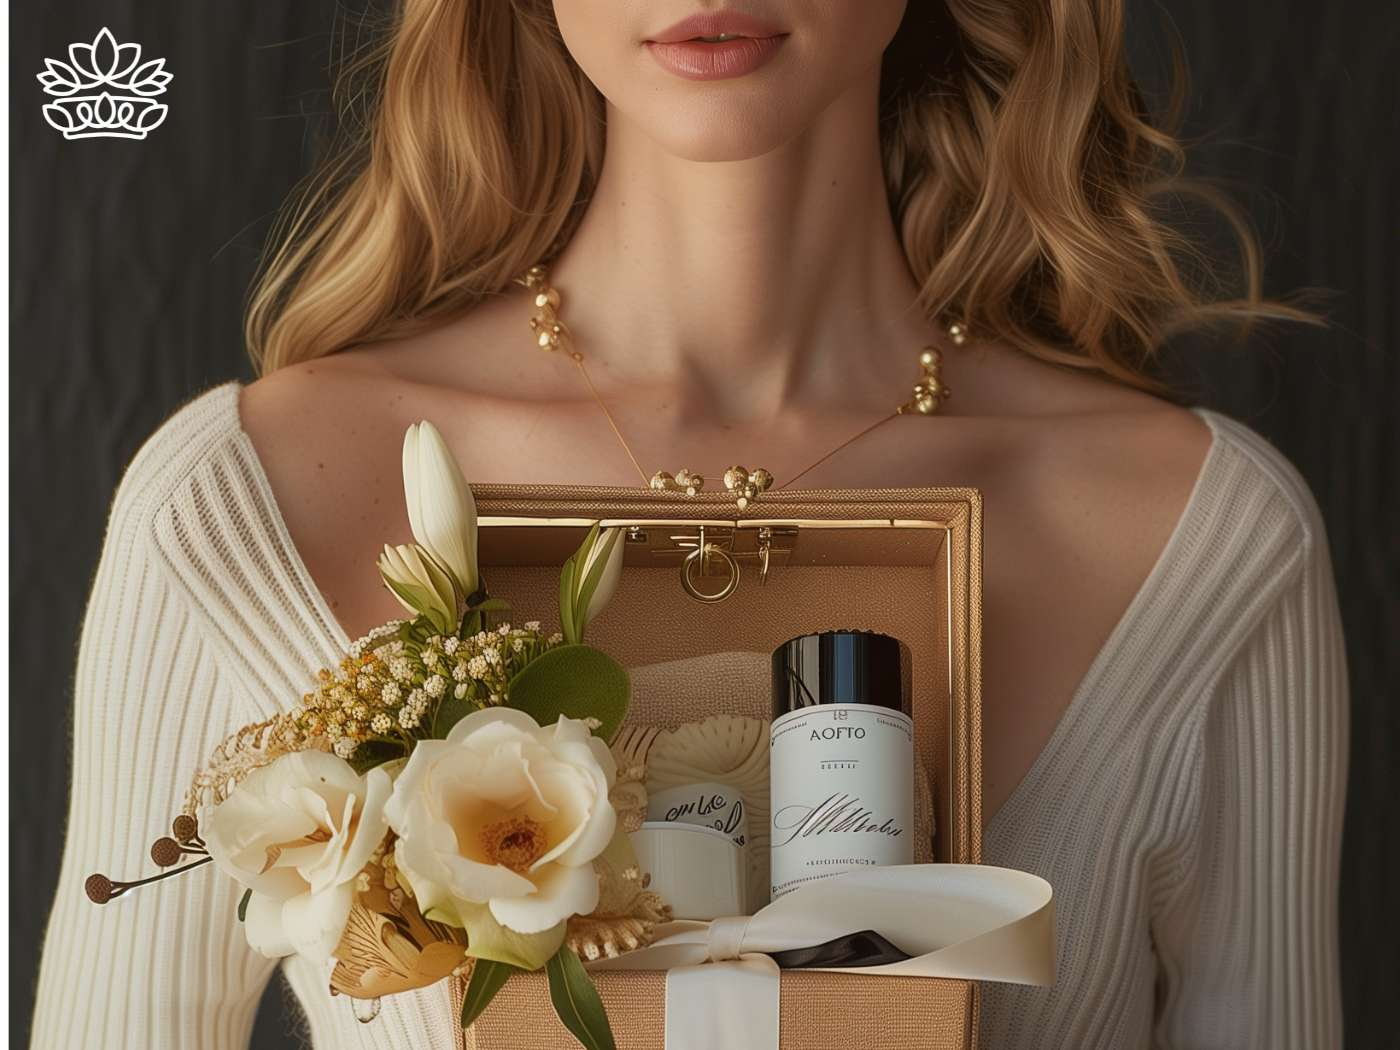 An elegant woman holding a bespoke gift box containing an exquisite fragrance and fresh white flowers, a sophisticated offering from Fabulous Flowers and Gifts.